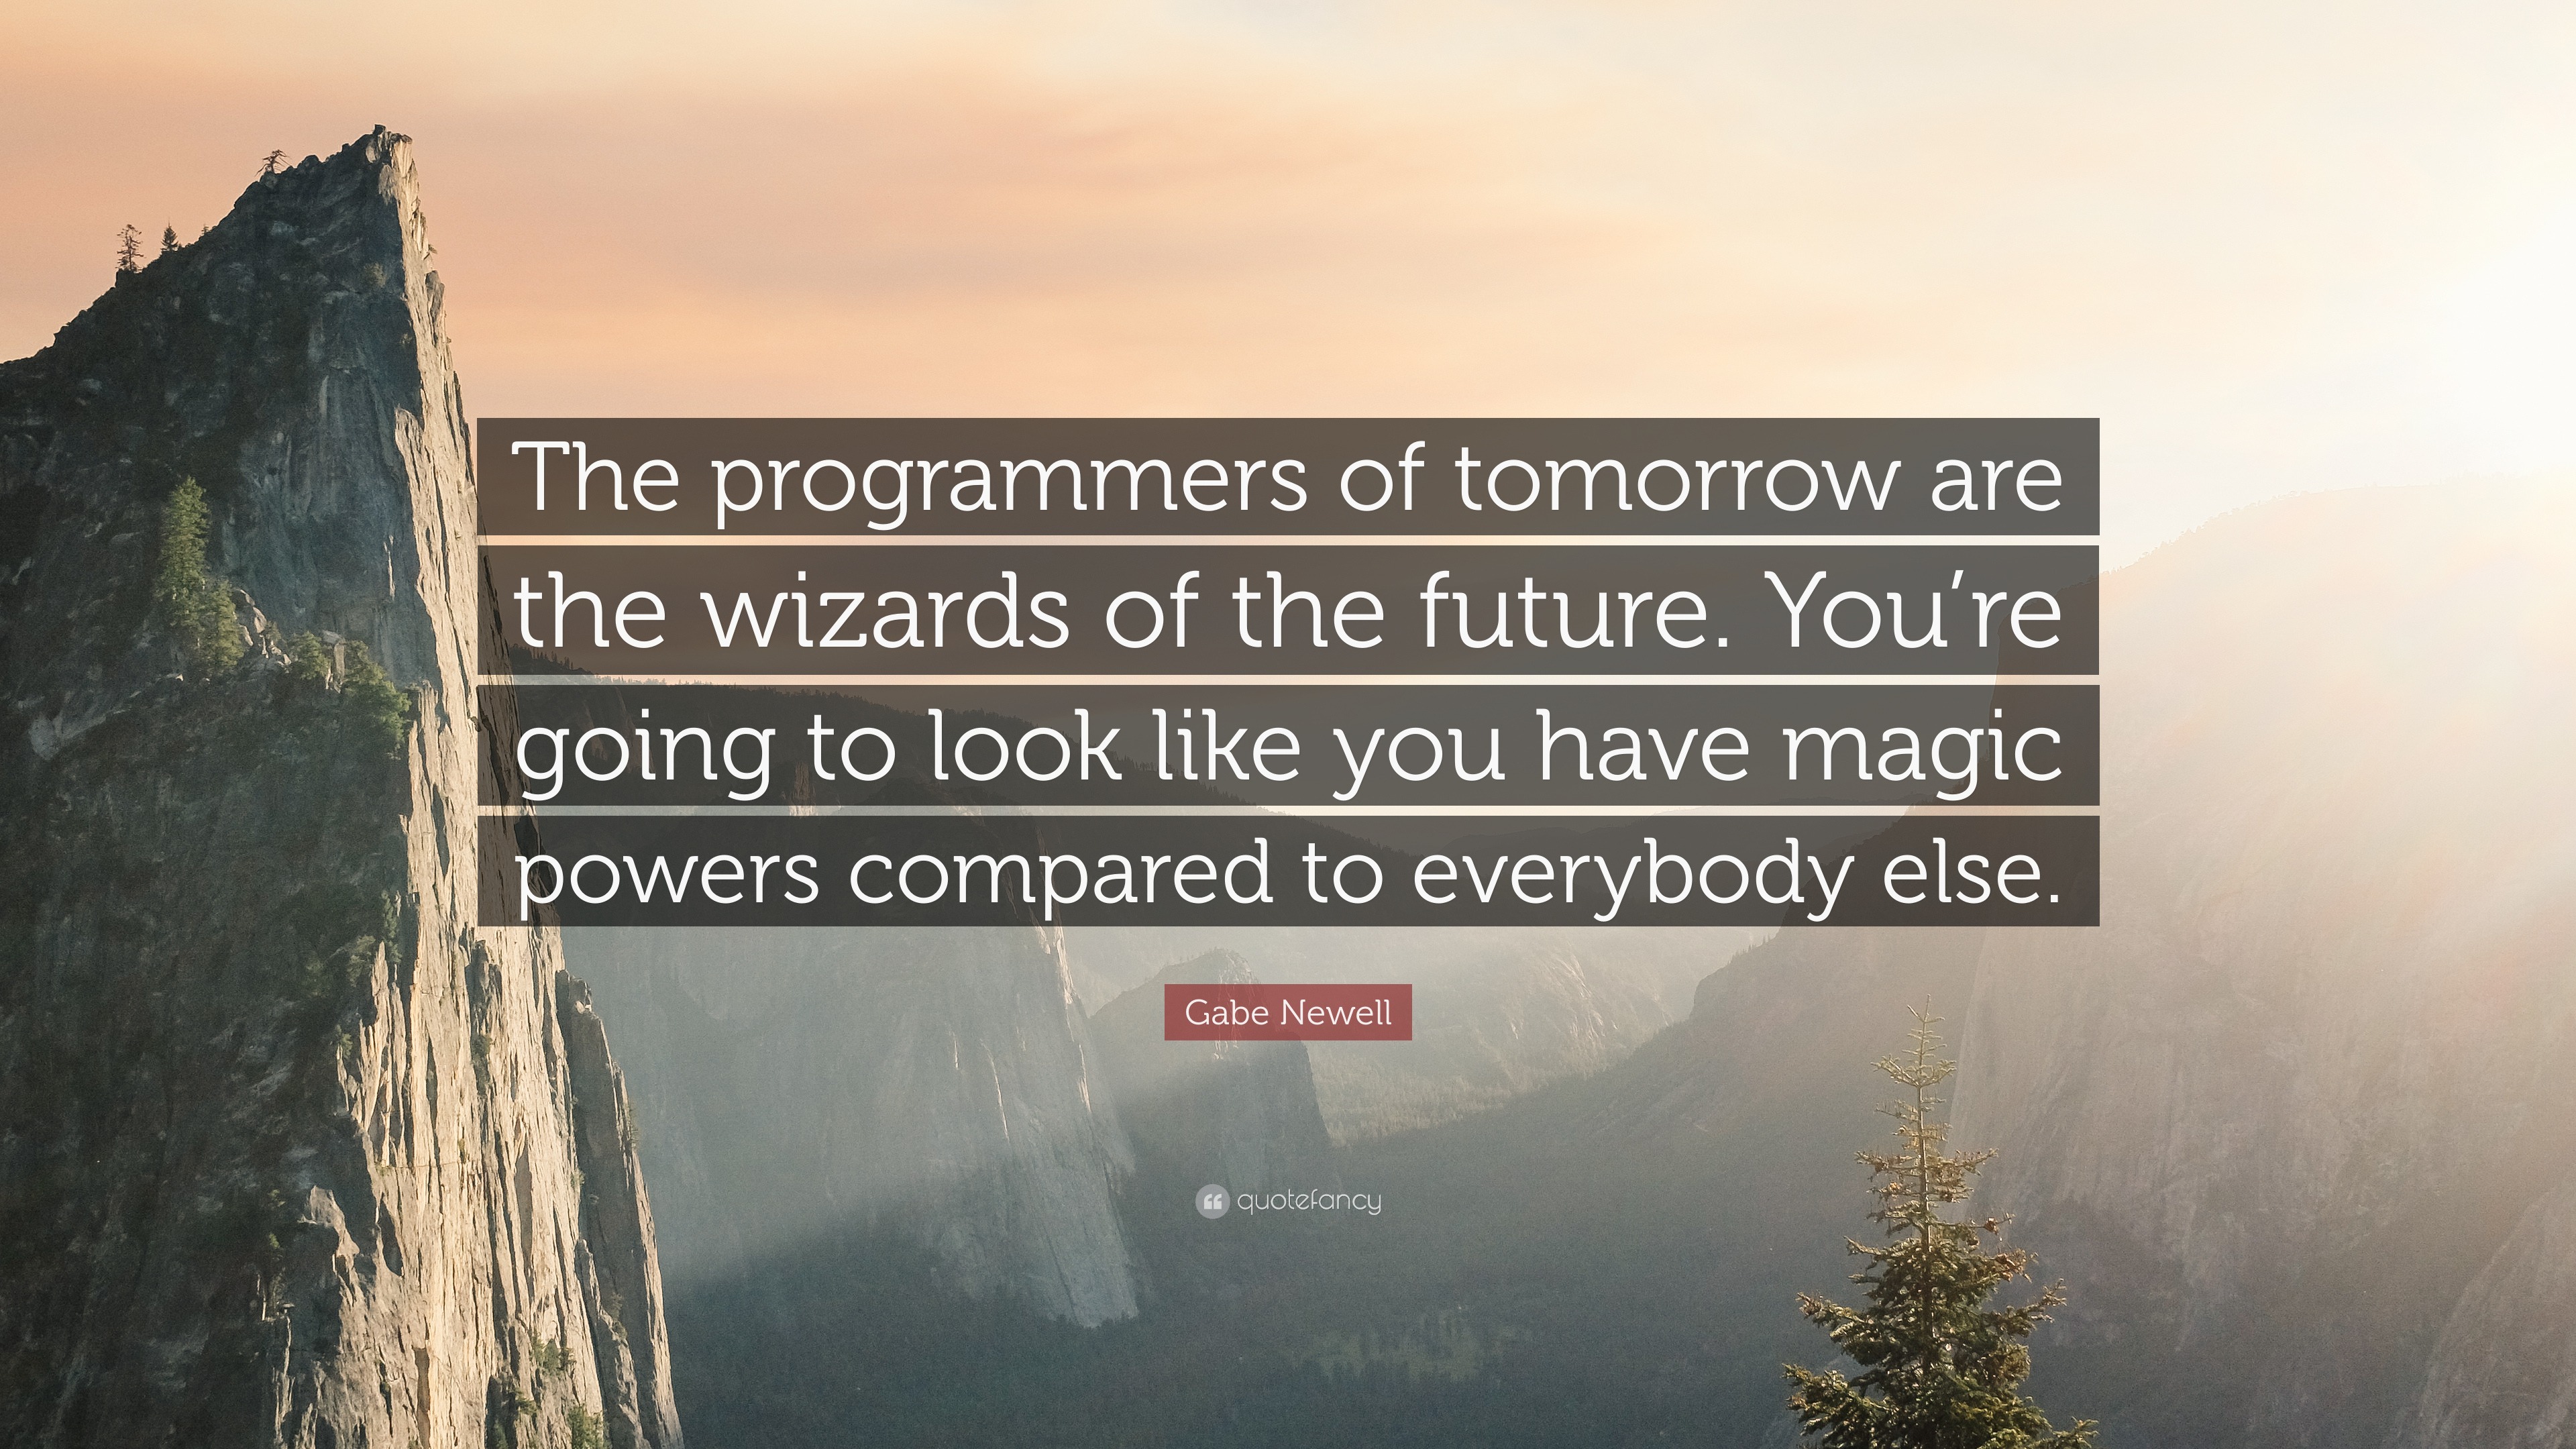 Gabe Newell Quote: “The programmers of tomorrow are the wizards of the